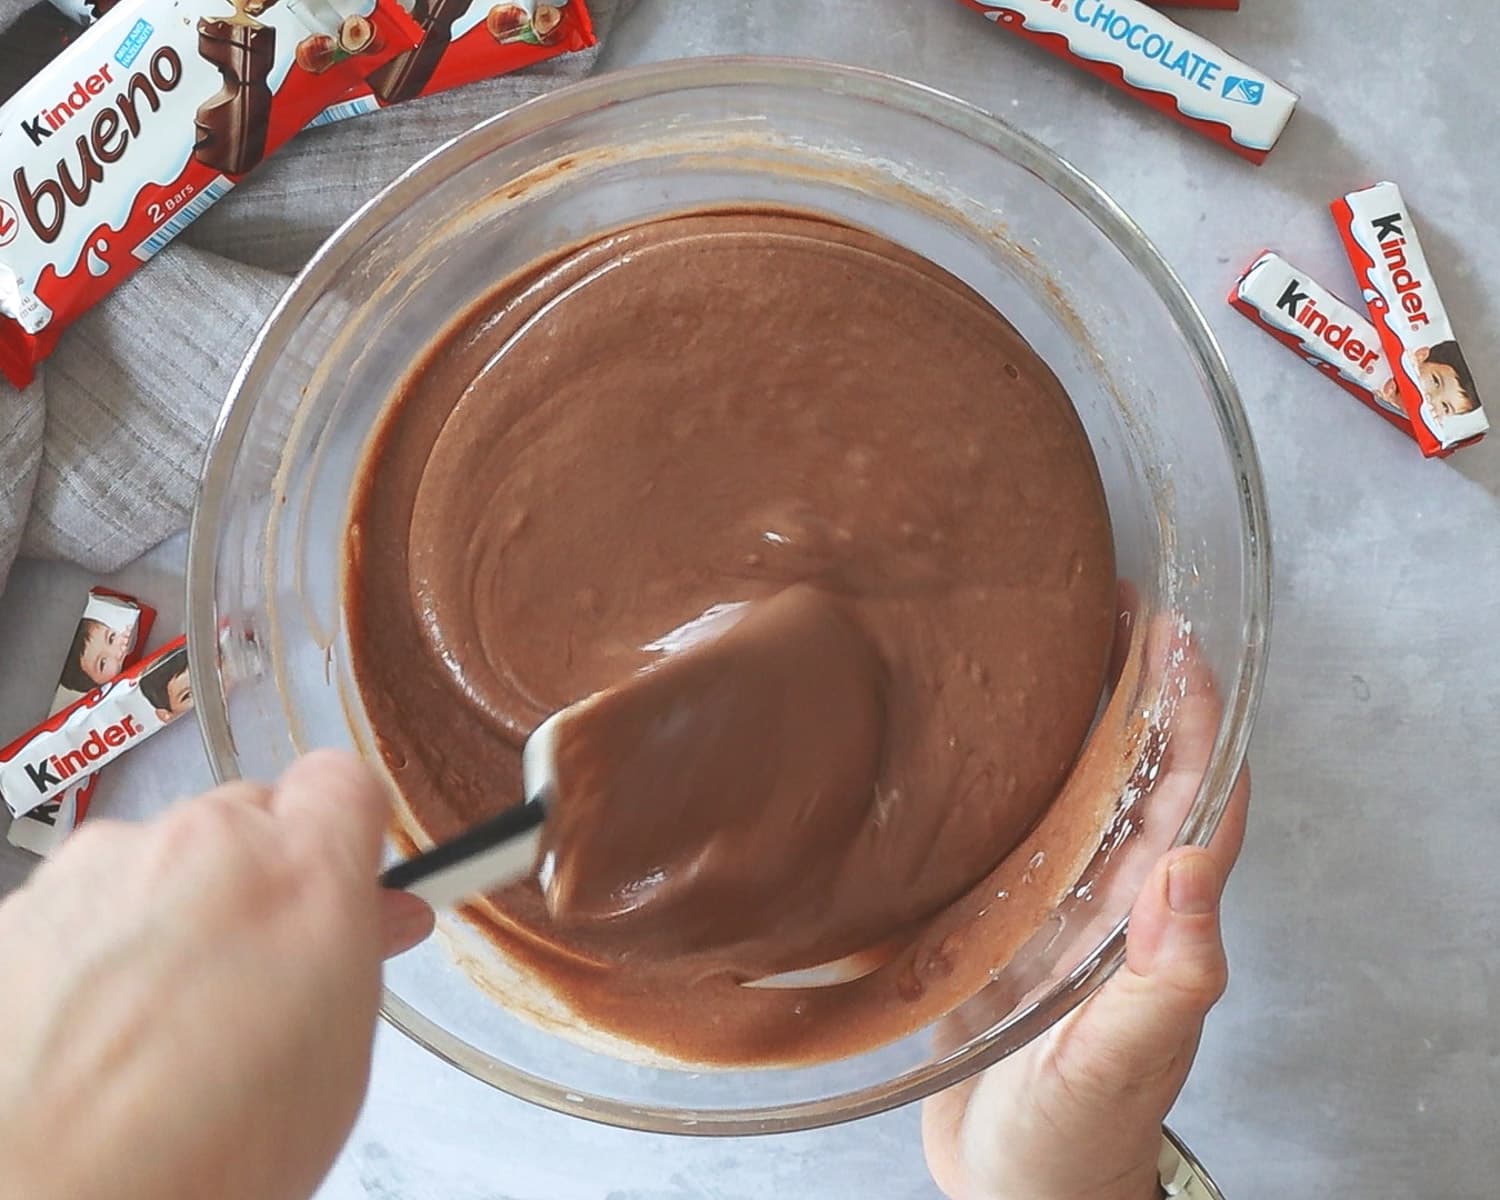 Mixing chocolate batter with a rubber spatula